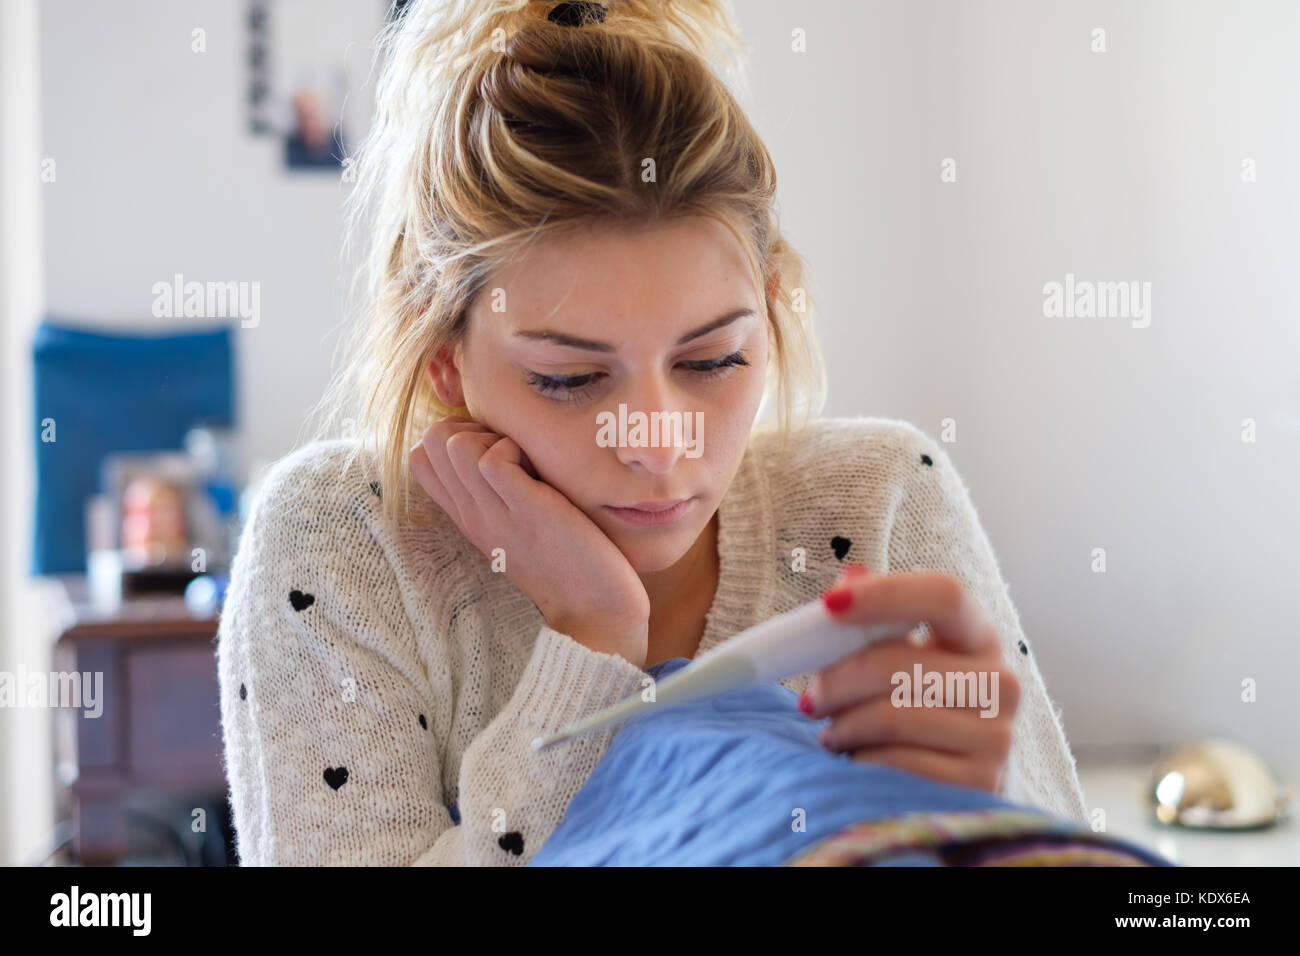 Sad young girl reading a pregnancy test result Stock Photo